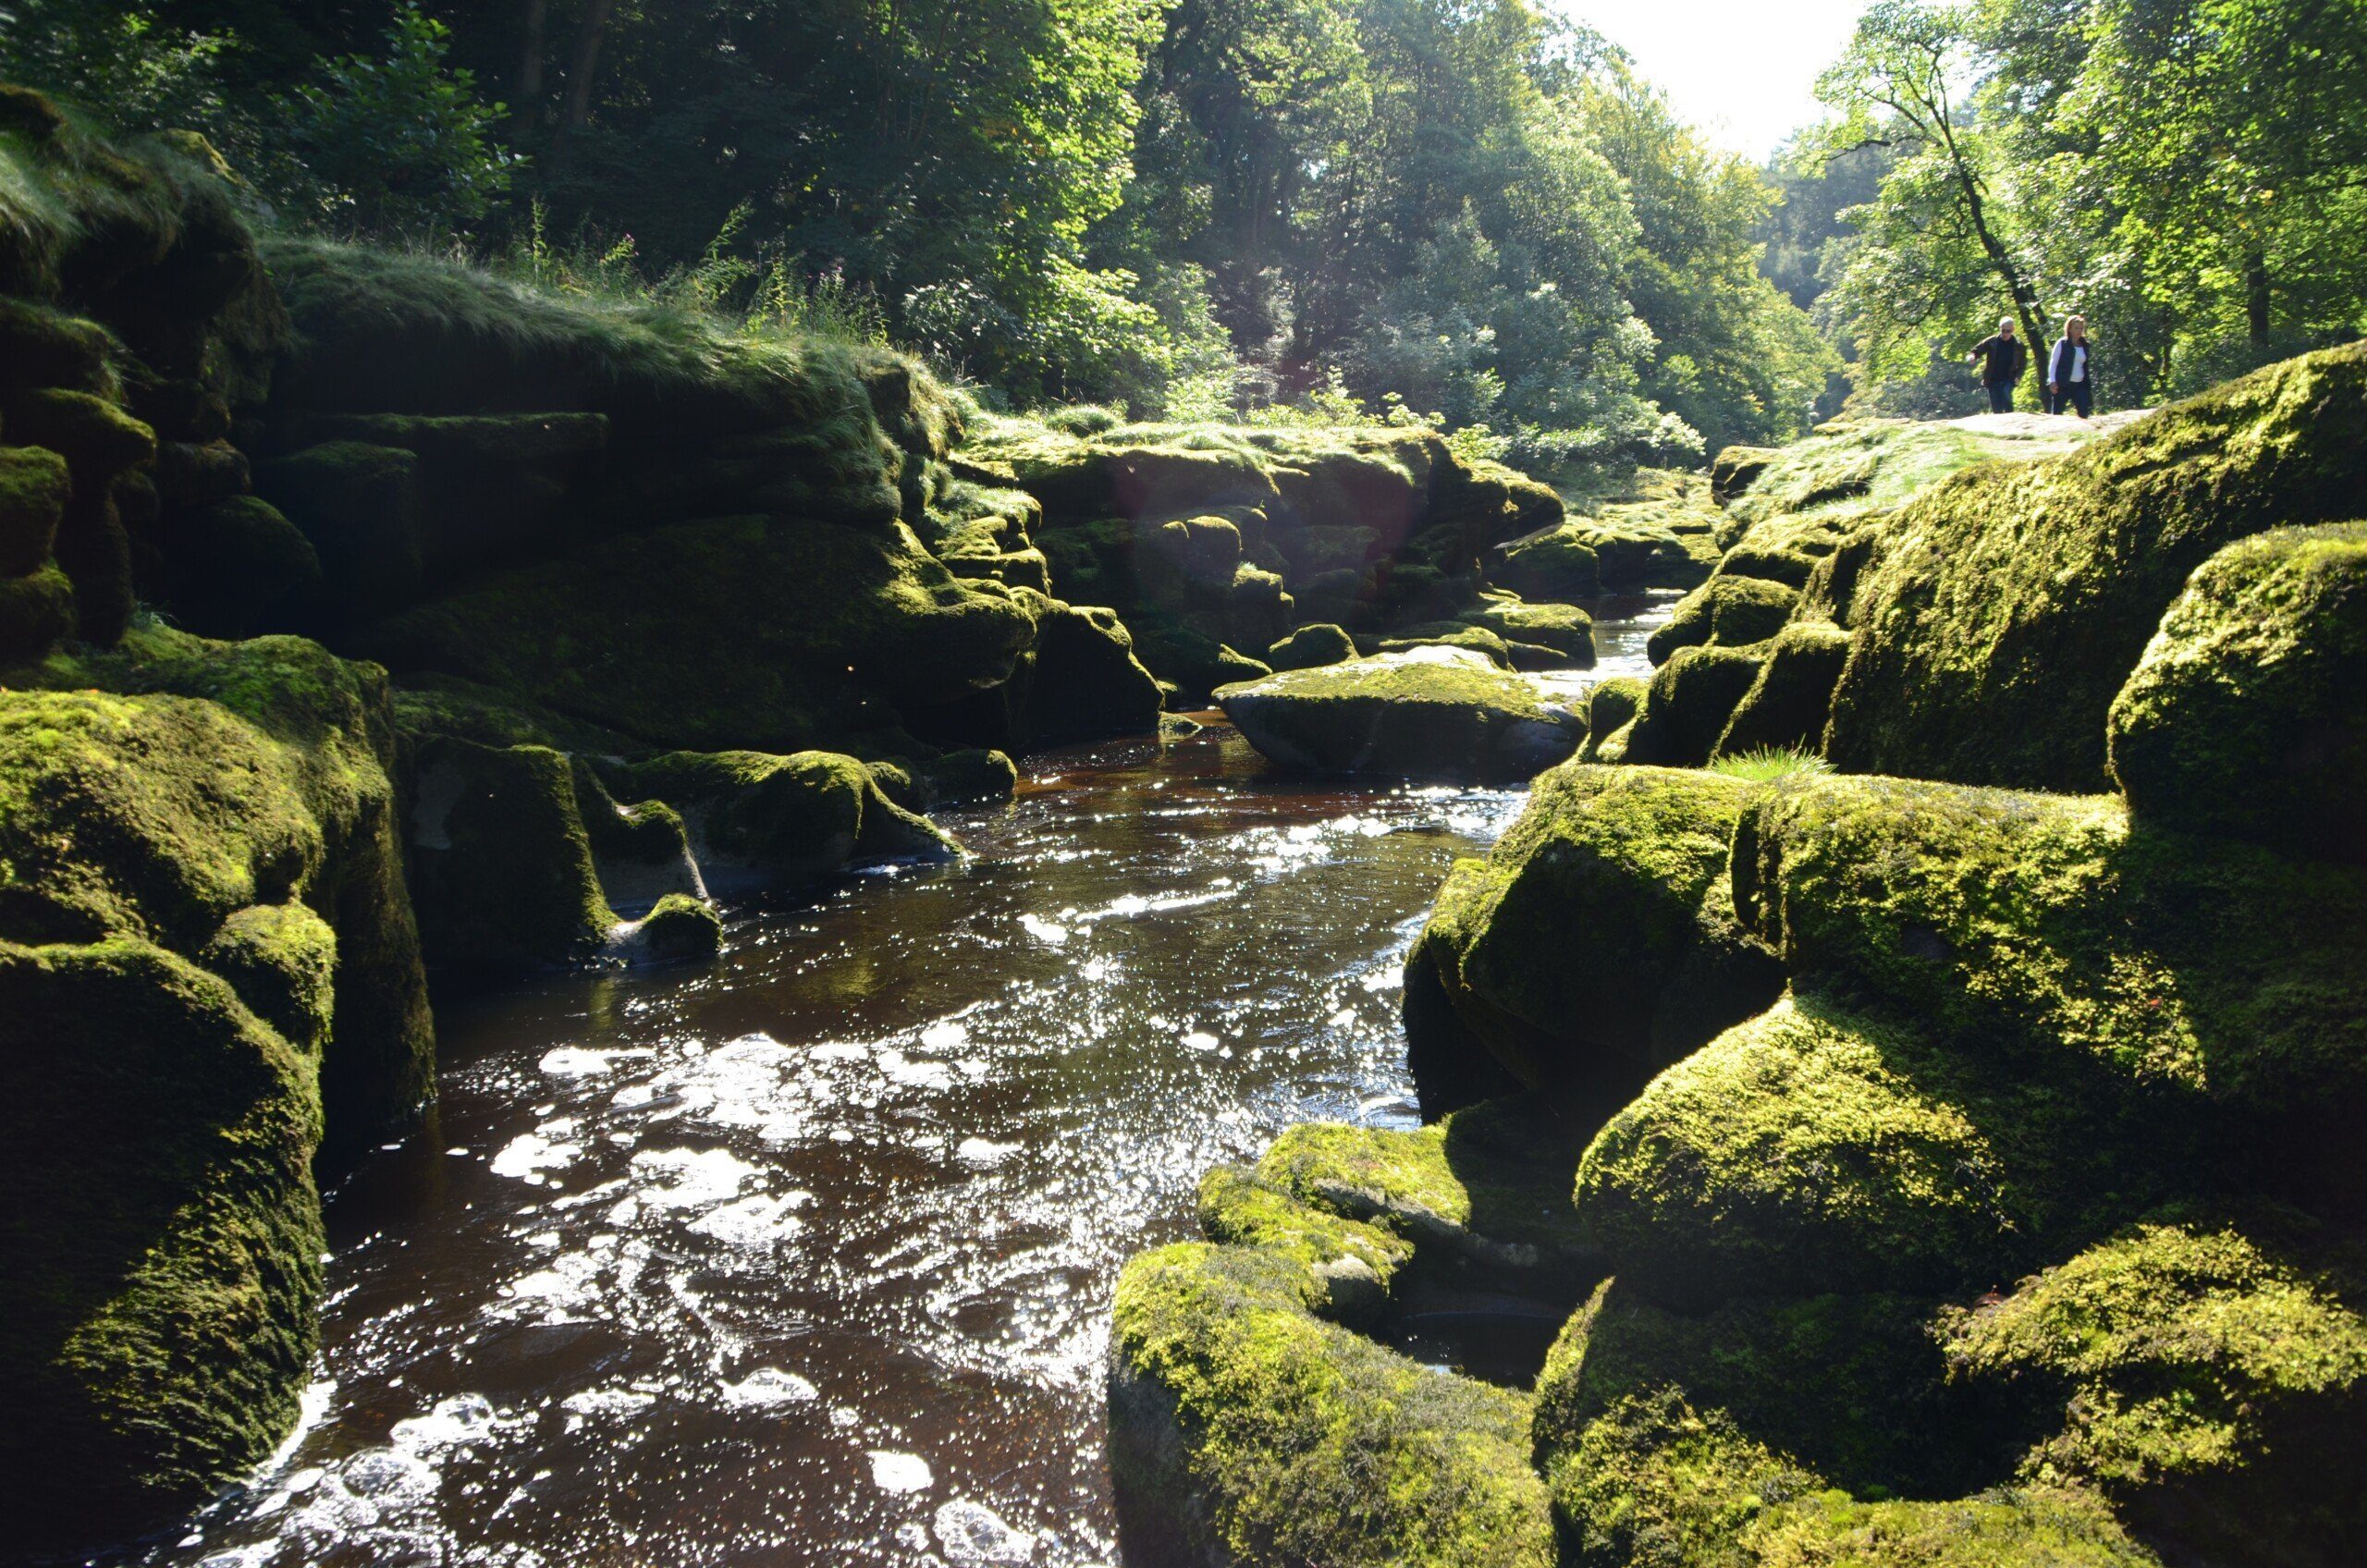 DALES WAY Shot of mossy rocks by a section of river known as the Strid